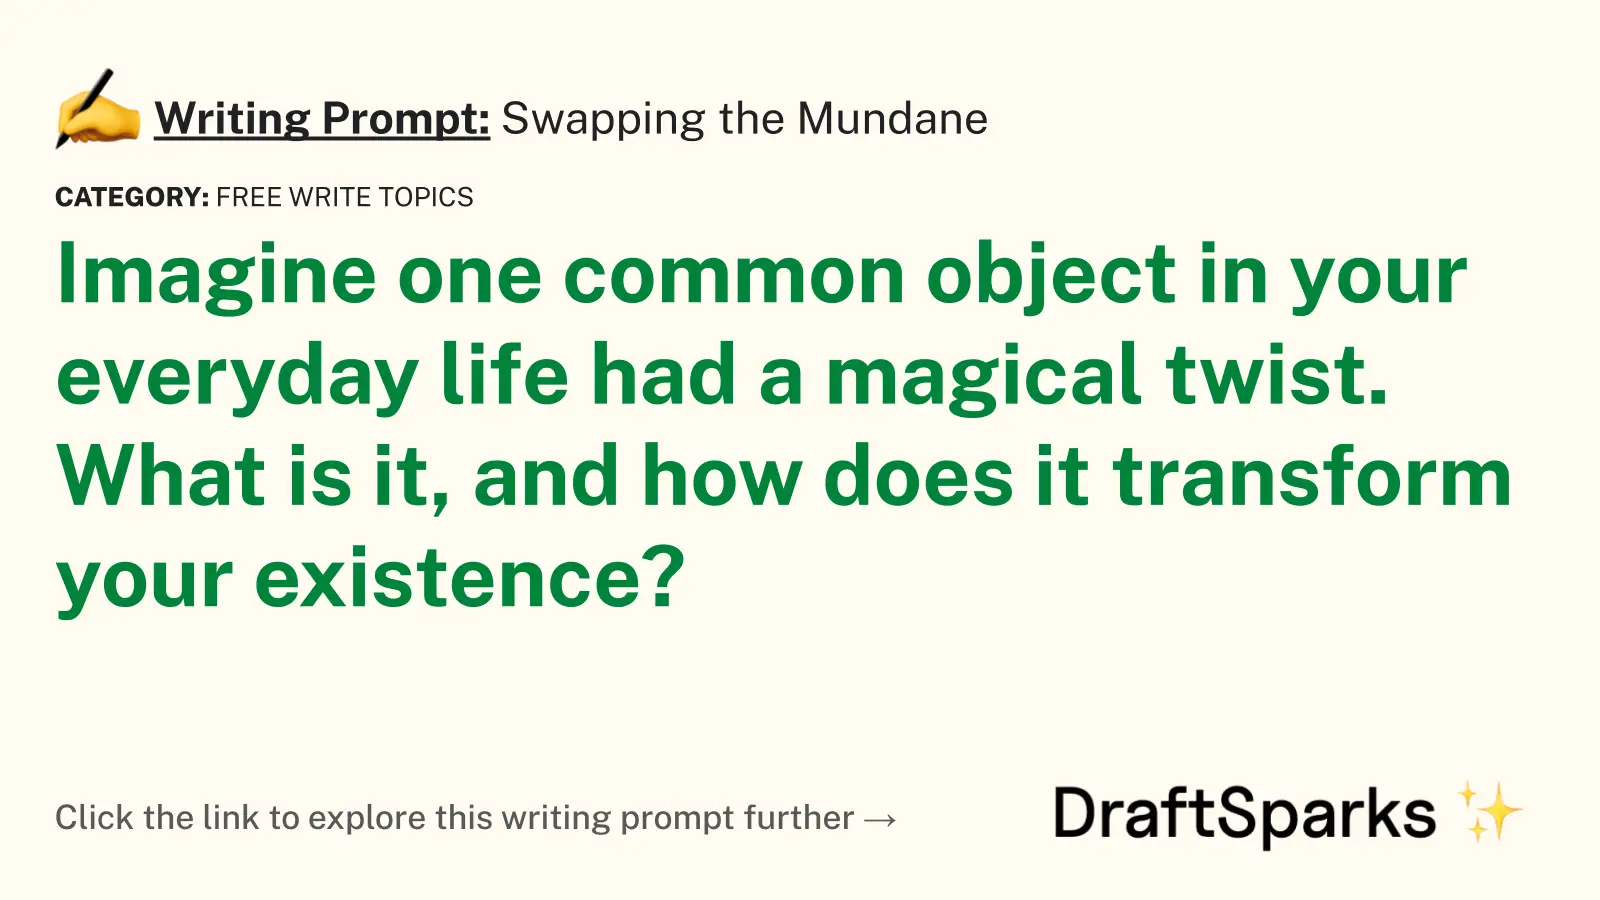 Swapping the Mundane